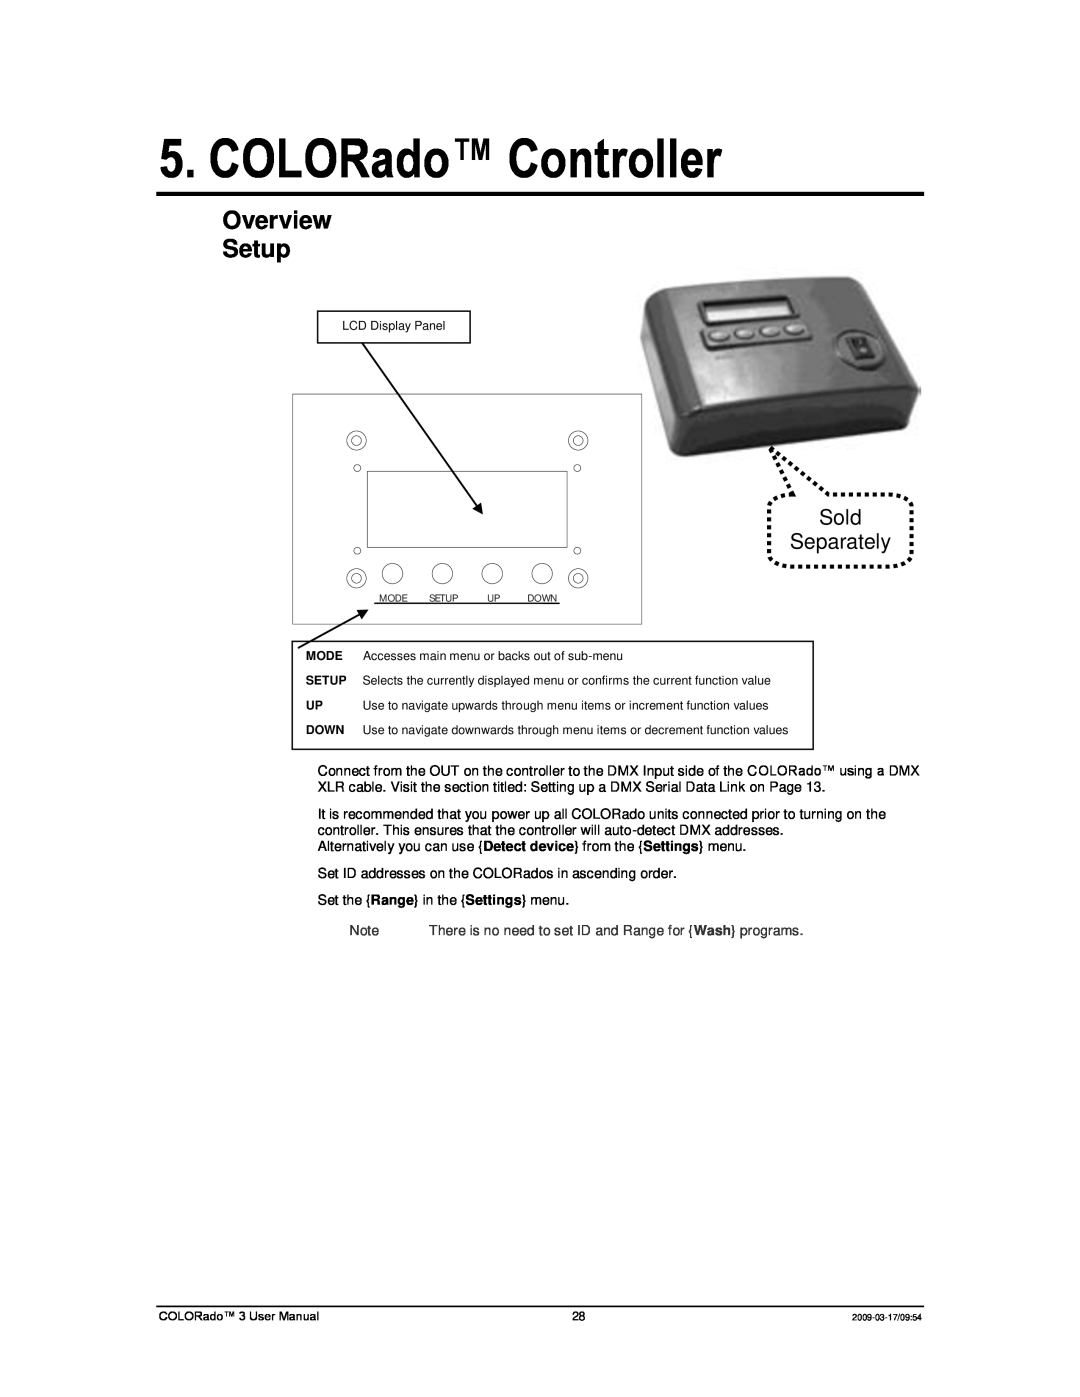 Chauvet 3P user manual COLORado Controller, Overview Setup, Sold Separately 